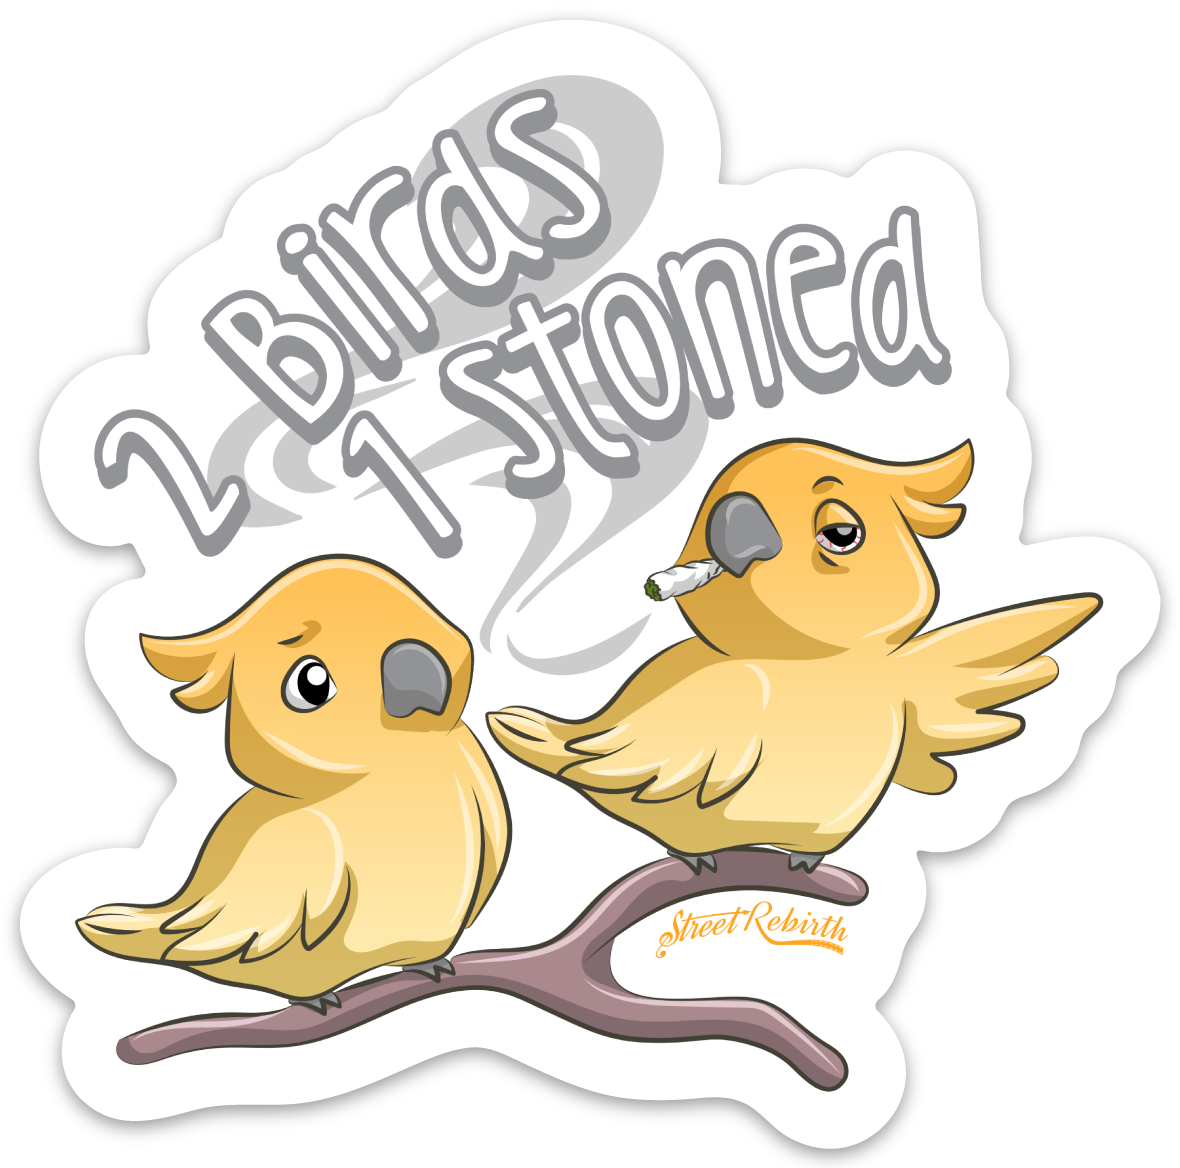 2 BIRDS 1 STONED PUN STICKER – ONE 4 INCH WATER PROOF VINYL STICKER – FOR HYDRO FLASK, SKATEBOARD, LAPTOP, PLANNER, CAR, COLLECTING, GIFTING